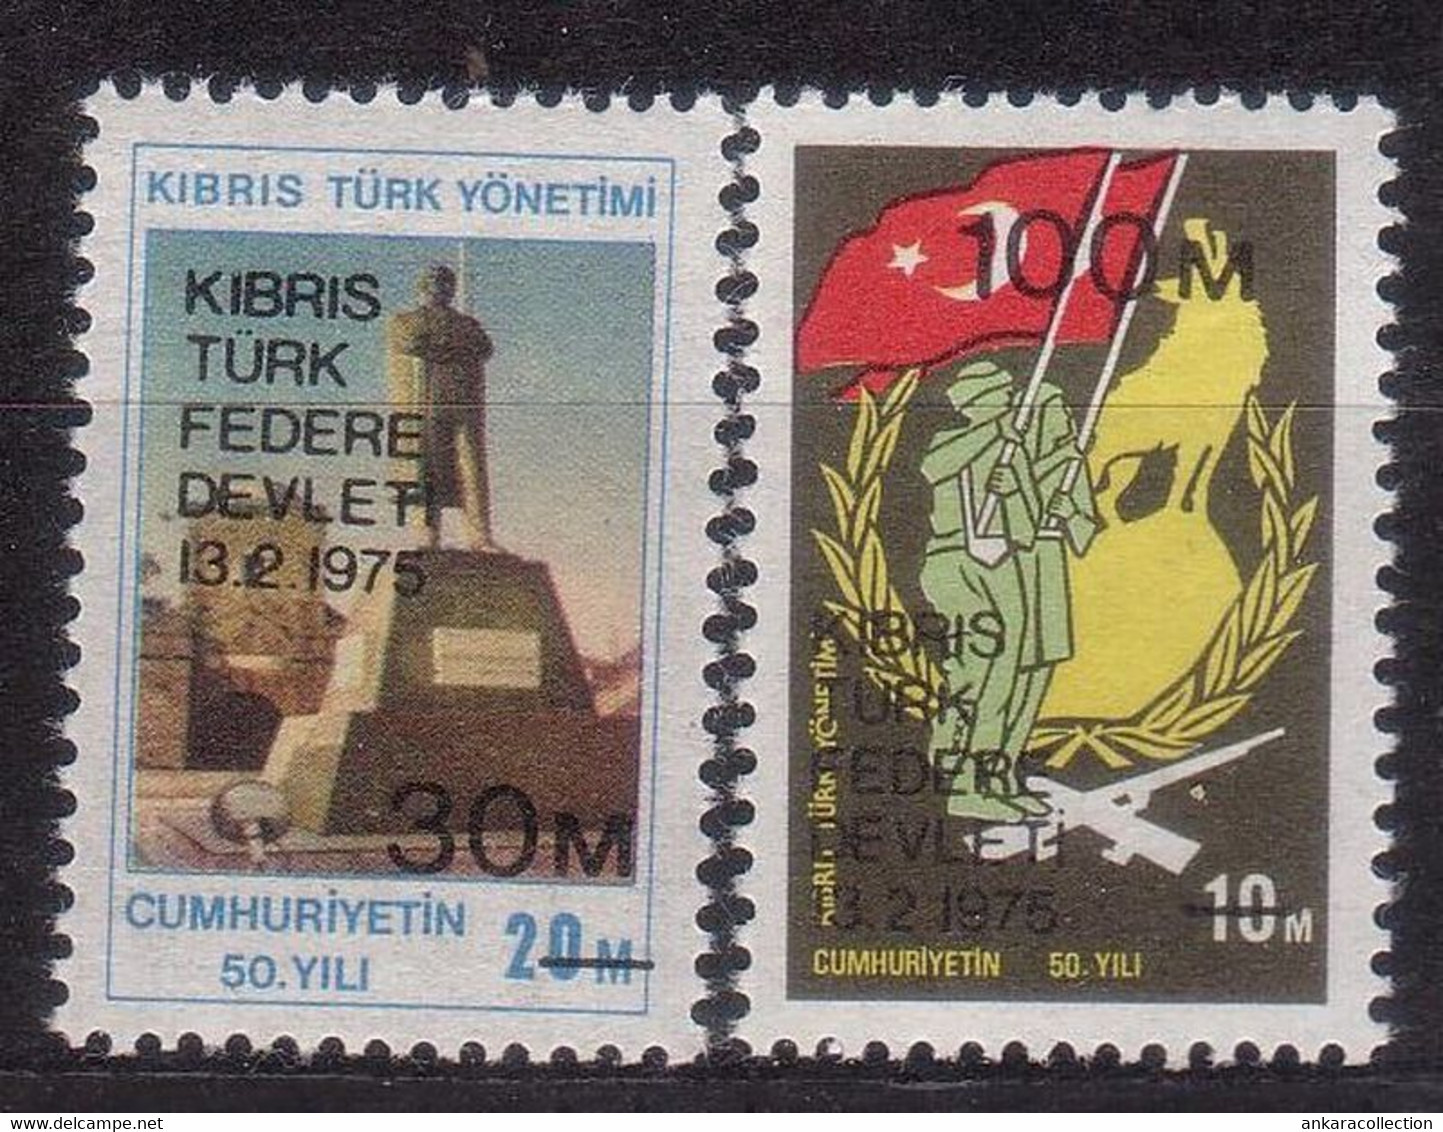 AC - NORTHERN CYPRUS STAMP - FOUNDATION OF FEDERAL STATE OF TURKISH CYPRUS MNH 03 MARCH 1975 - Ongebruikt